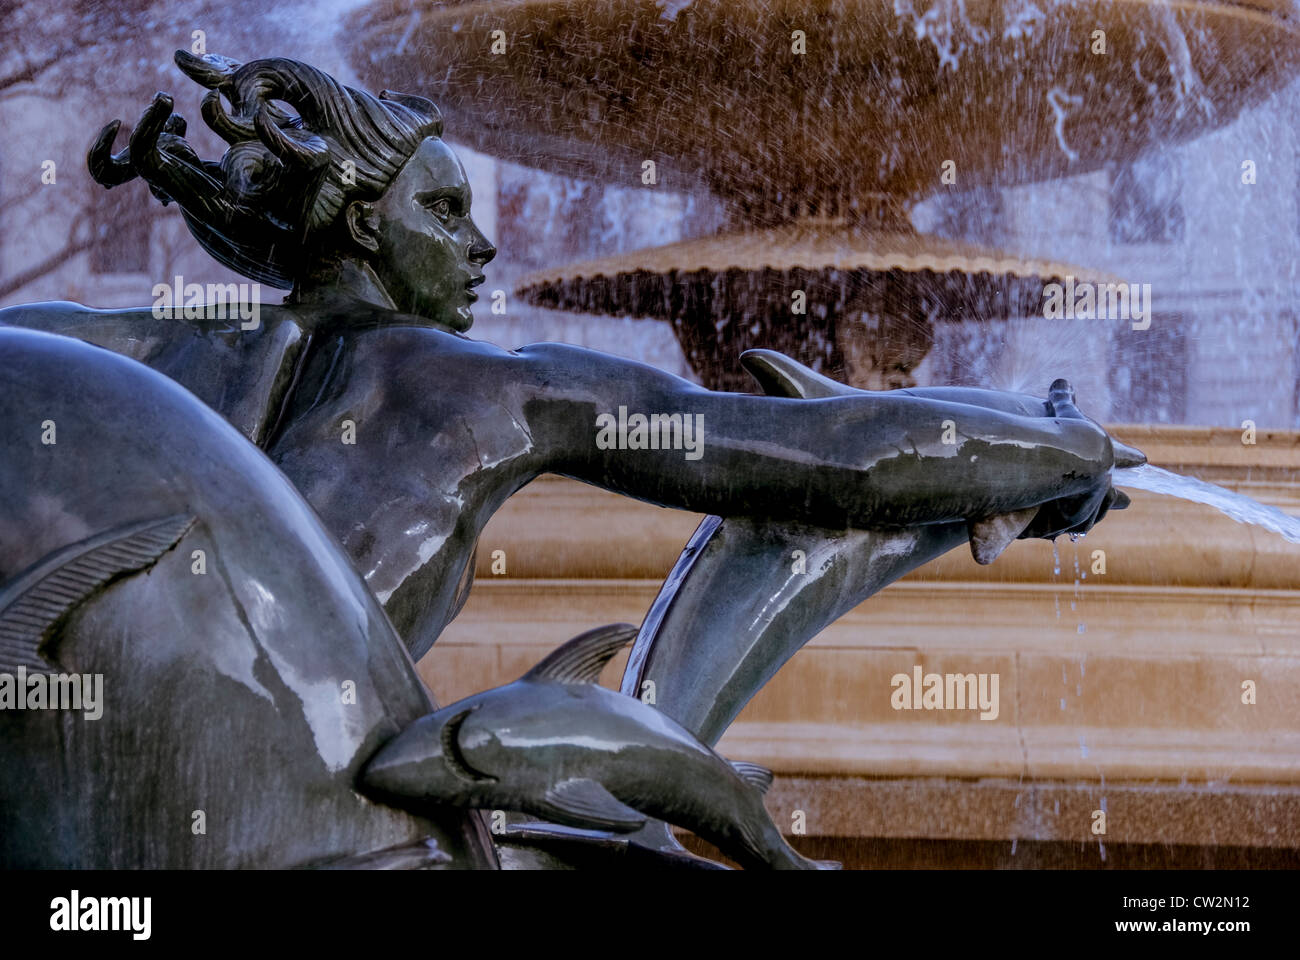 Close up detail of bronze mermaid and dolphins statue in the fountain, Trafalgar Square, London Stock Photo